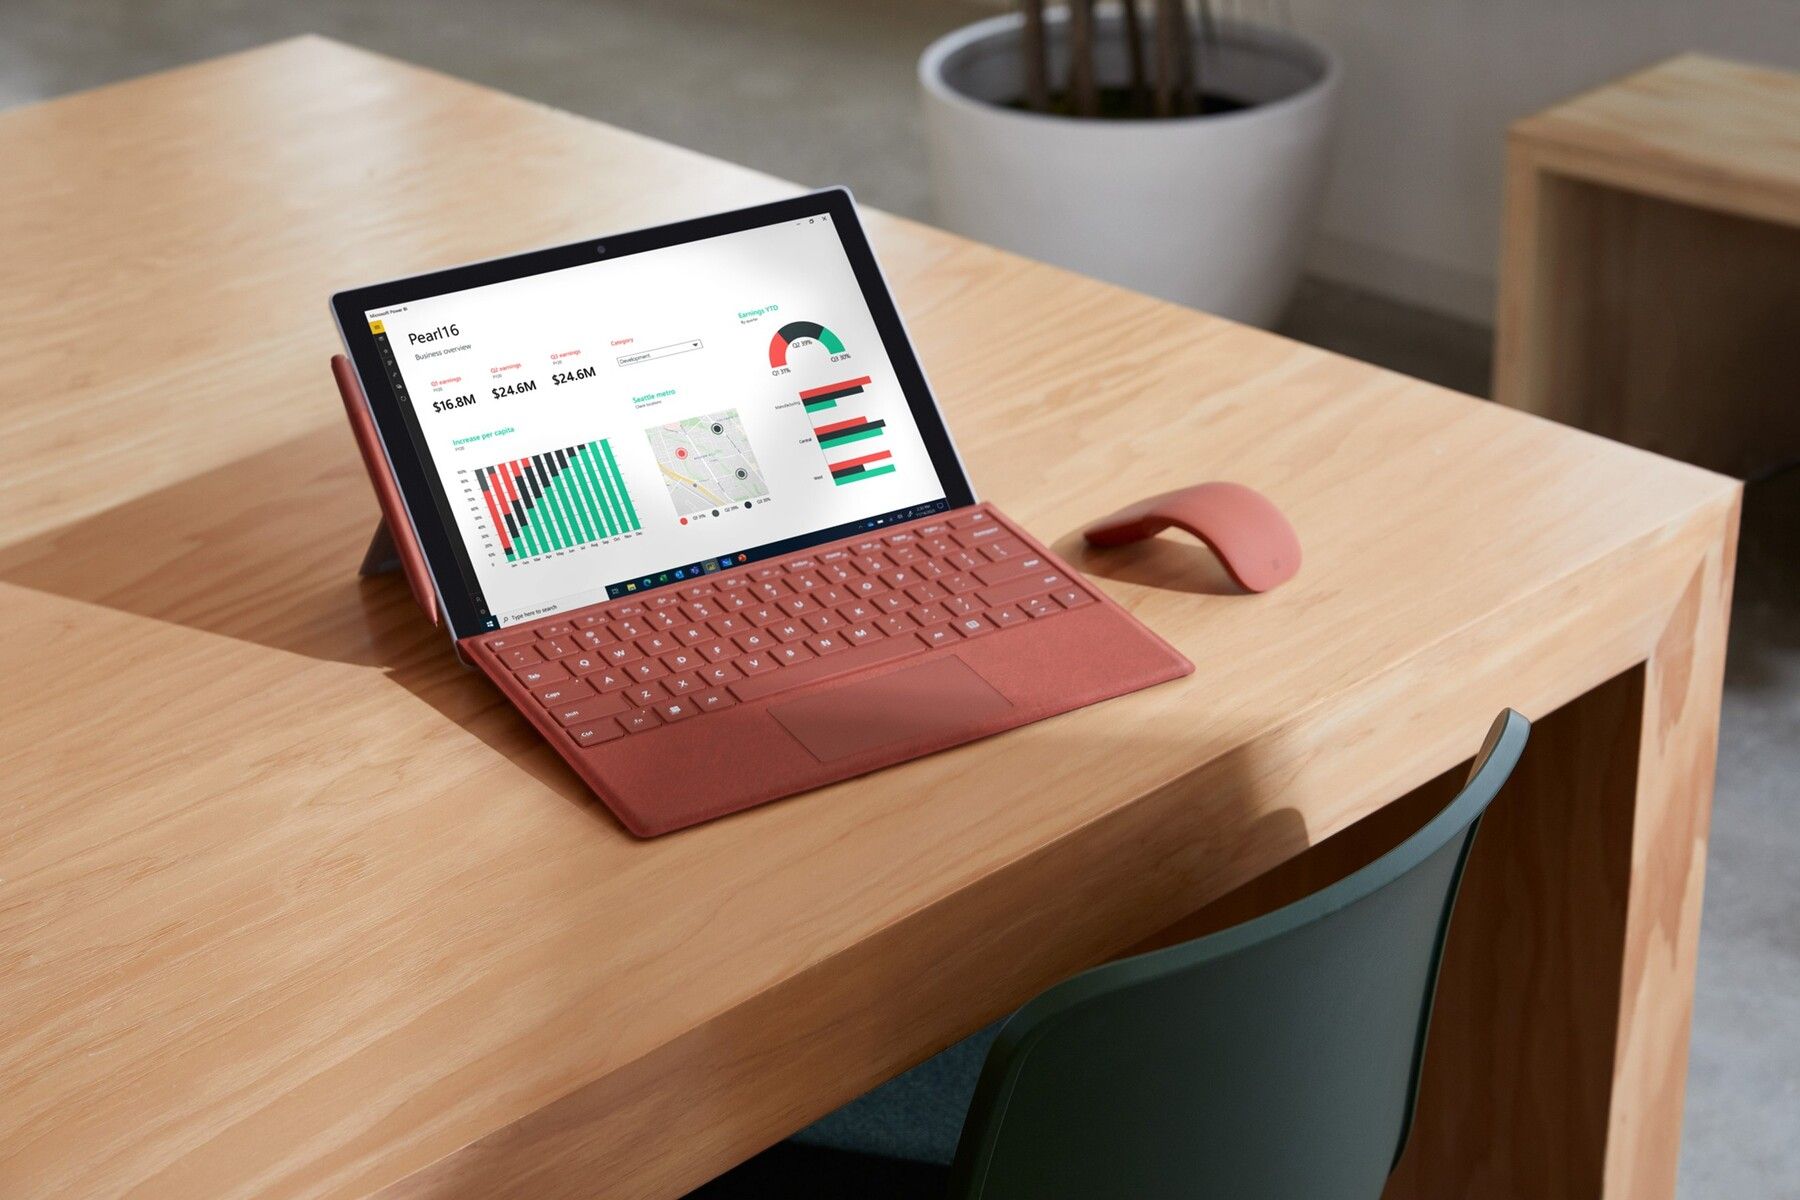 Microsoft Surface Pro 7+ laptop announced with 11th-gen Intel Tiger Lake CPUs, removable SSD, and more